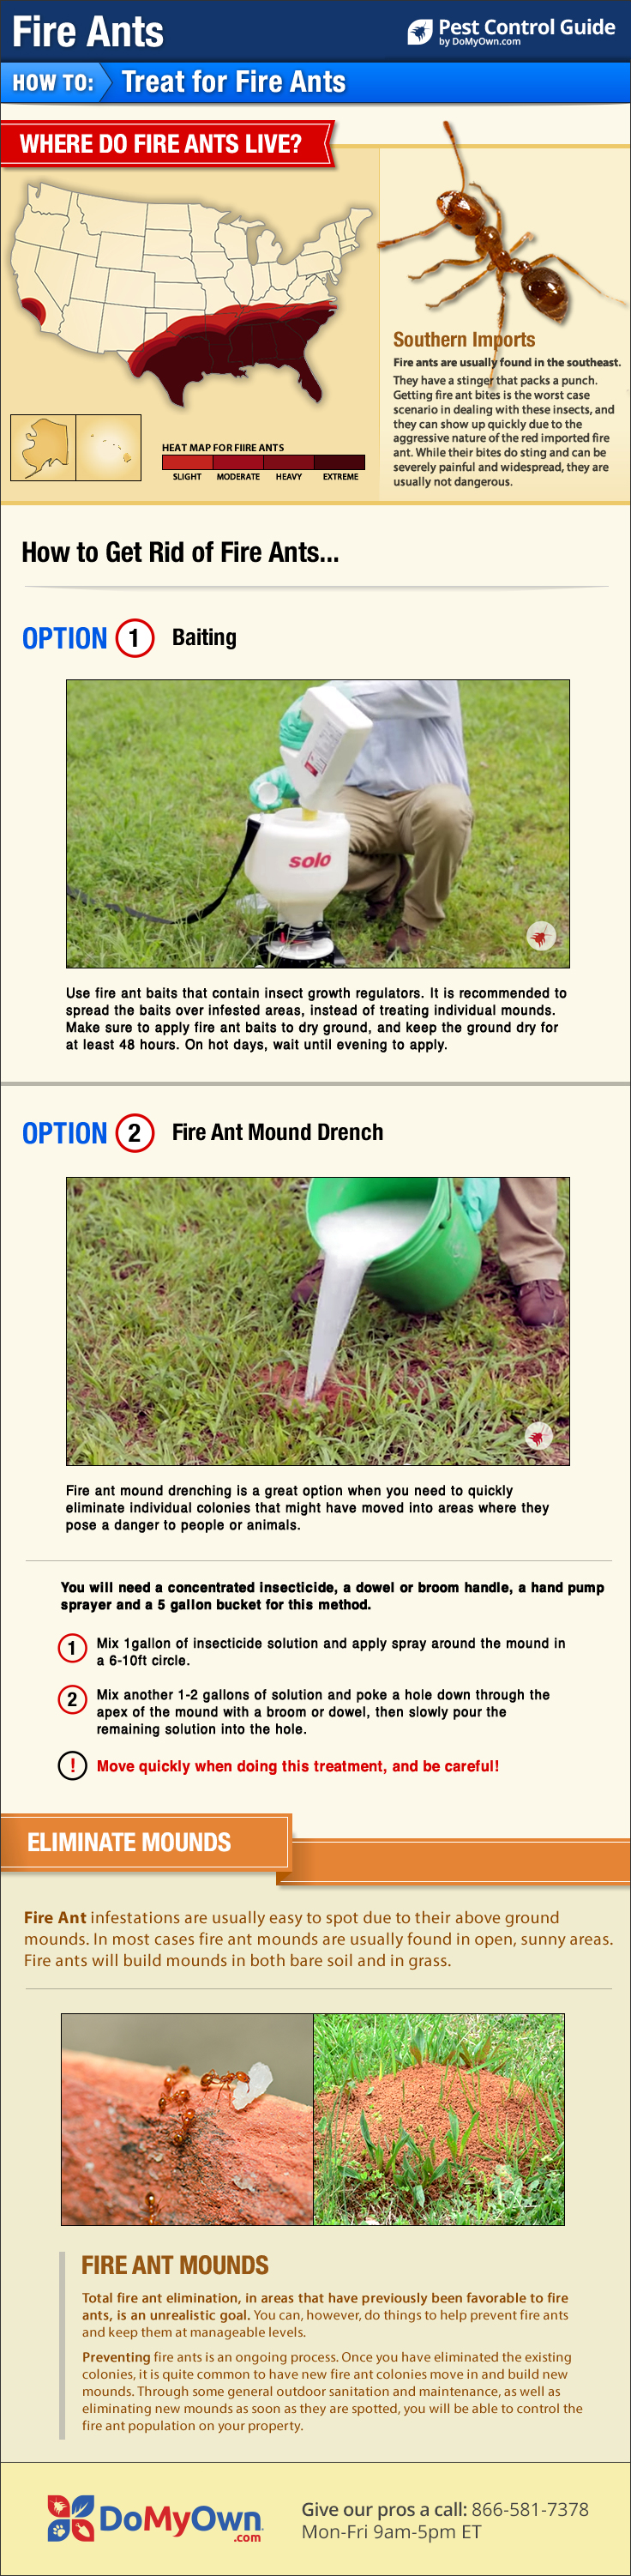 How To Get Rid Of Kill Fire Ants Fire Ant Treatment Guide,What Is Corian Made Of